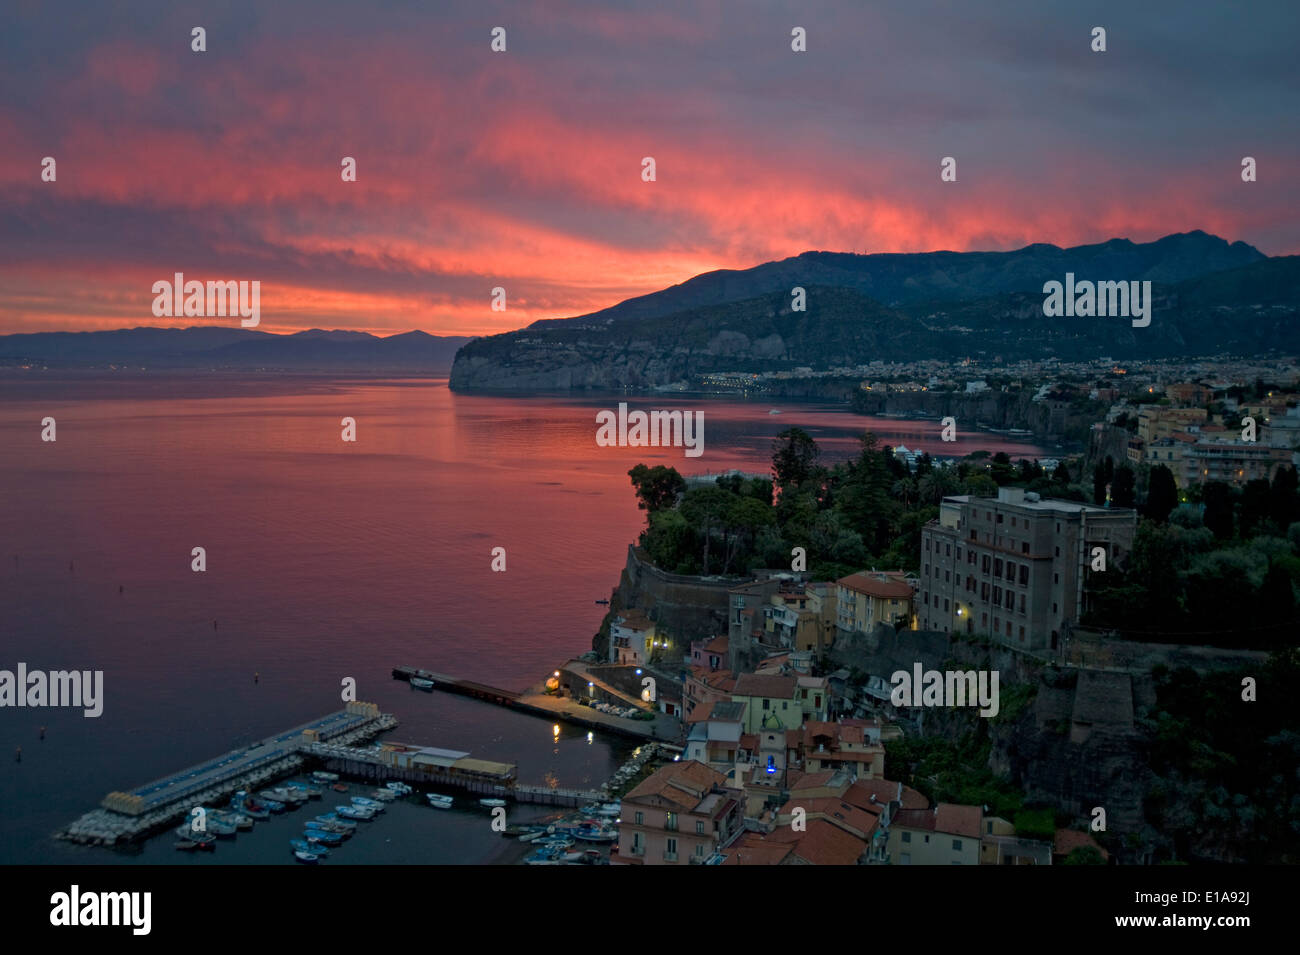 A fiery sunrise with red sky over Sorrento, the Bay of Naples, Italy Stock Photo